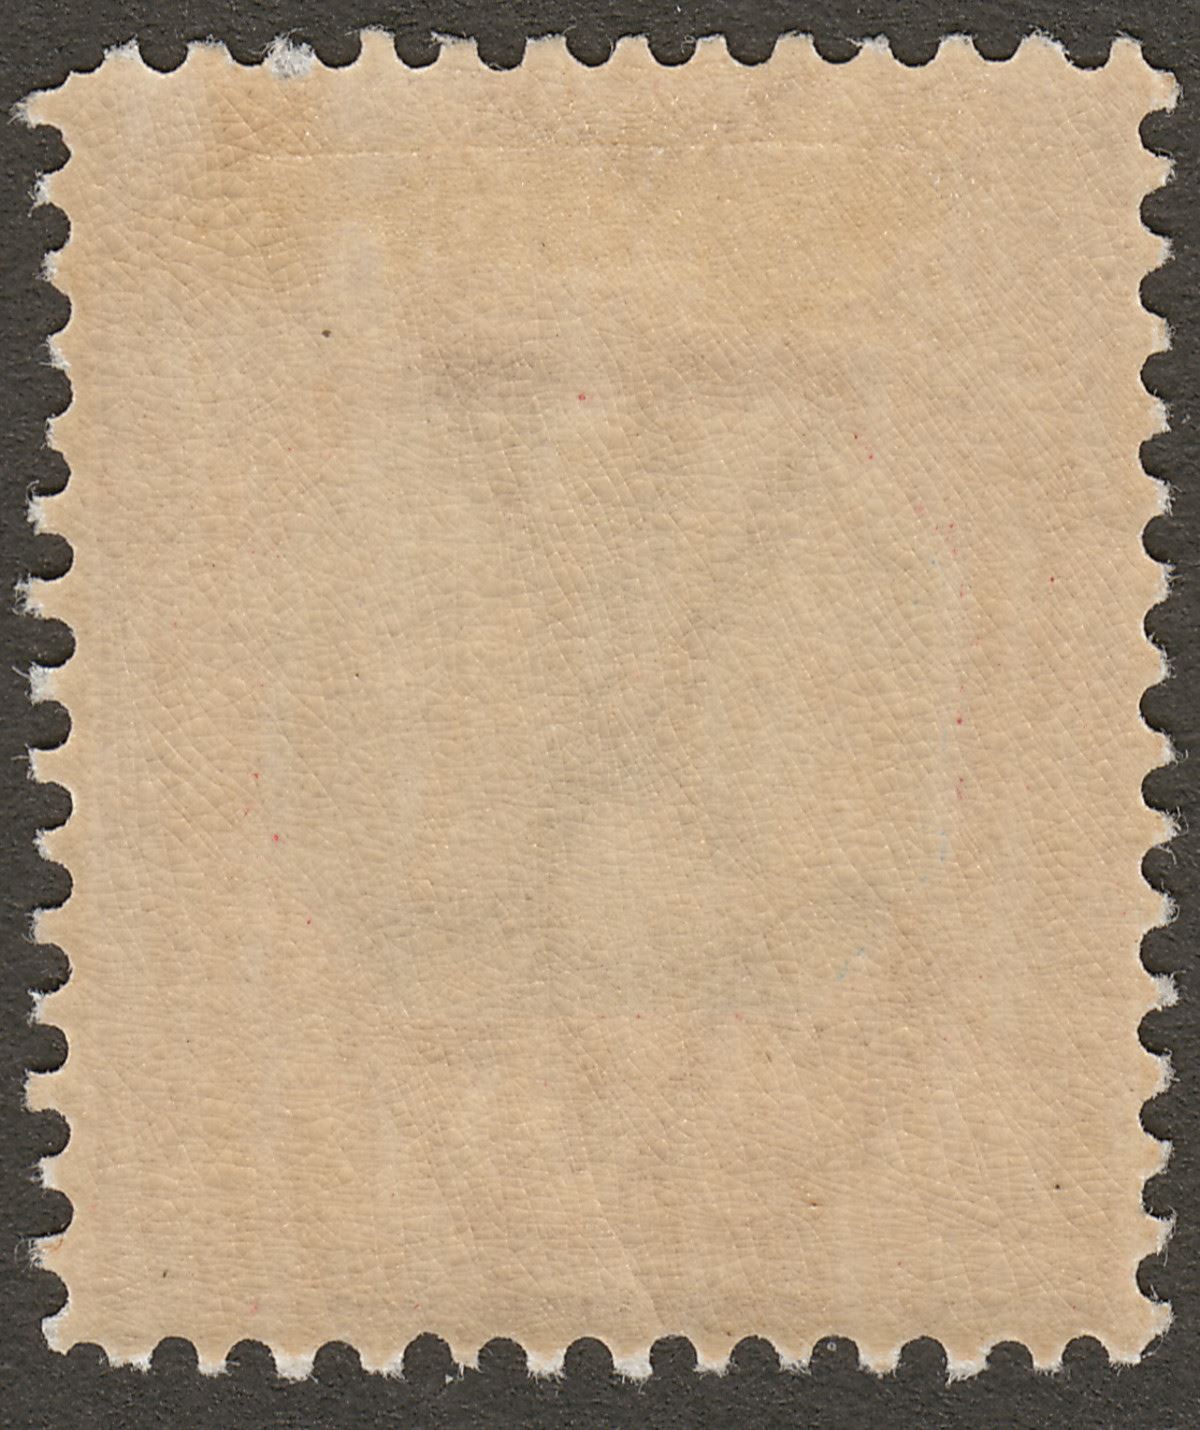 Victoria 1890 QV Postage Due 5d Dull Blue and Brown-Lake Mint SG D5 cat £29